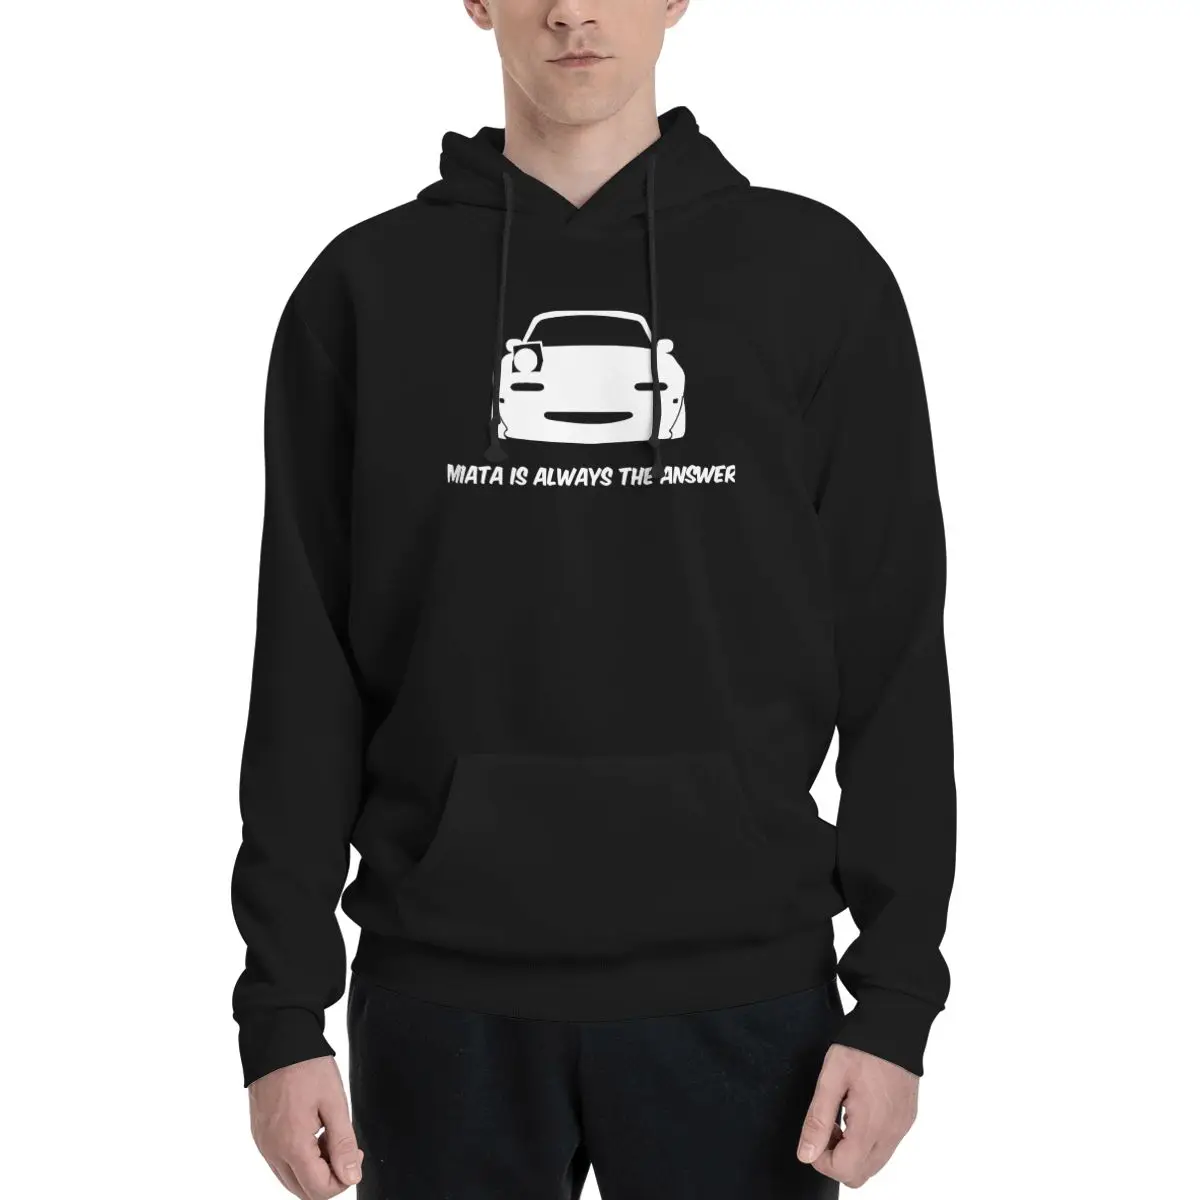 

New Limited Miata Is Always The Answer Polyester Hoodie Men's sweatershirt Warm Dif Colors Sizes